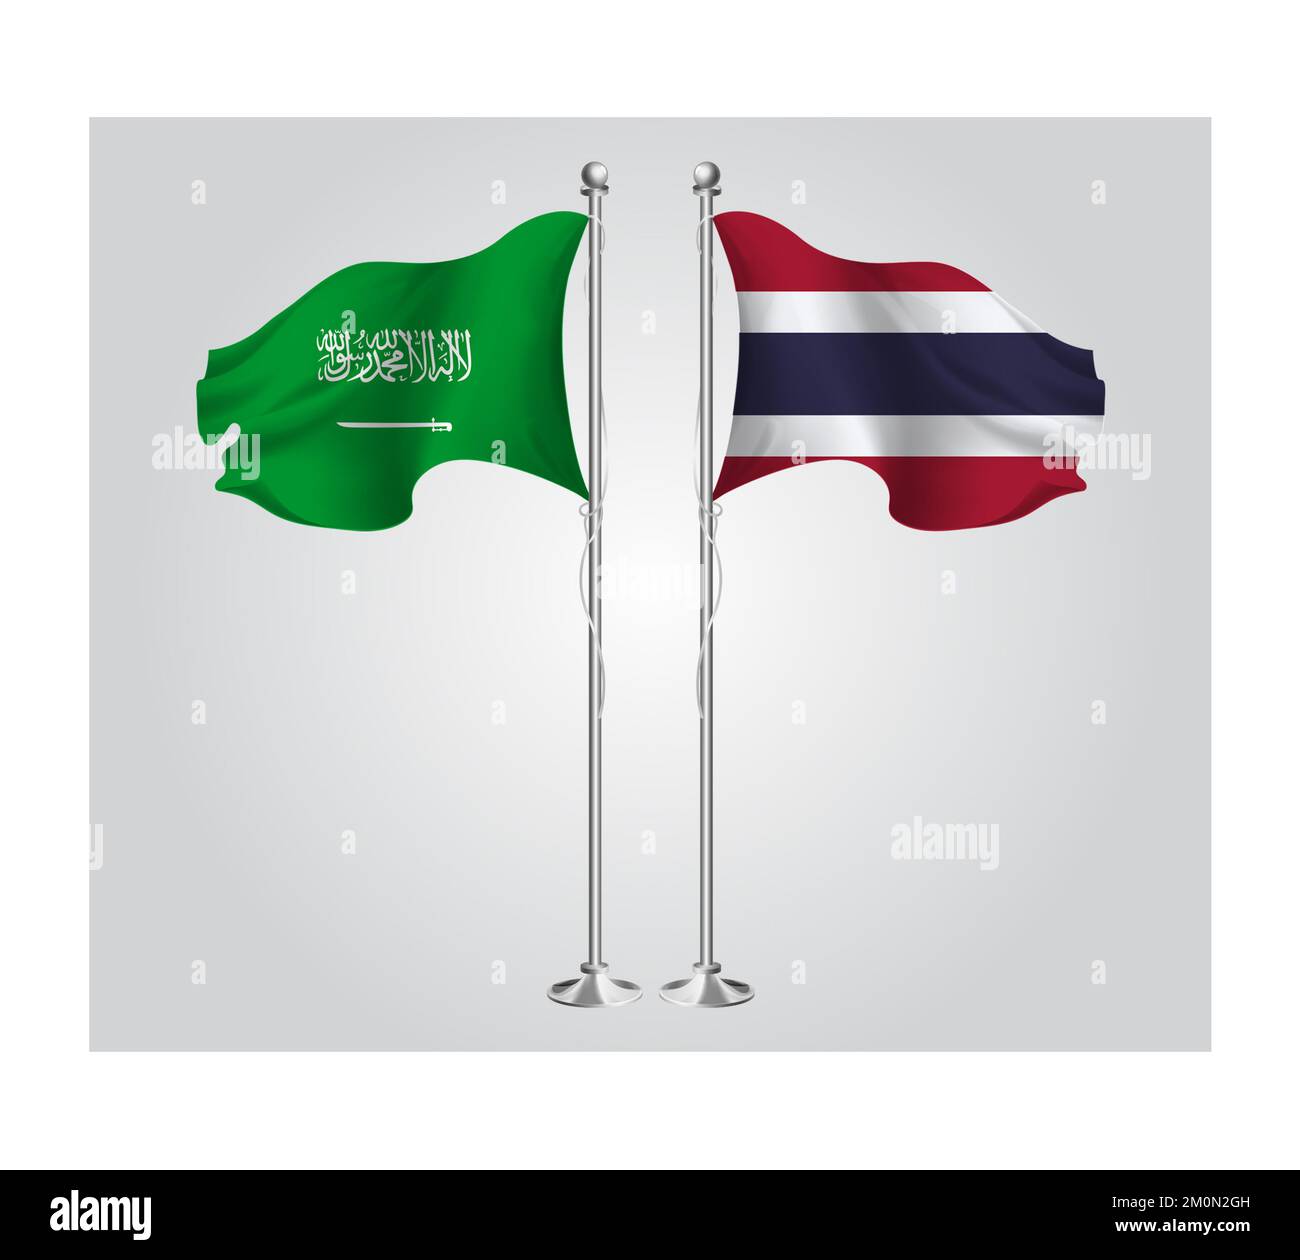 Saudi Arabi National flag for Friendship, cooperation and business deals Stock Photo